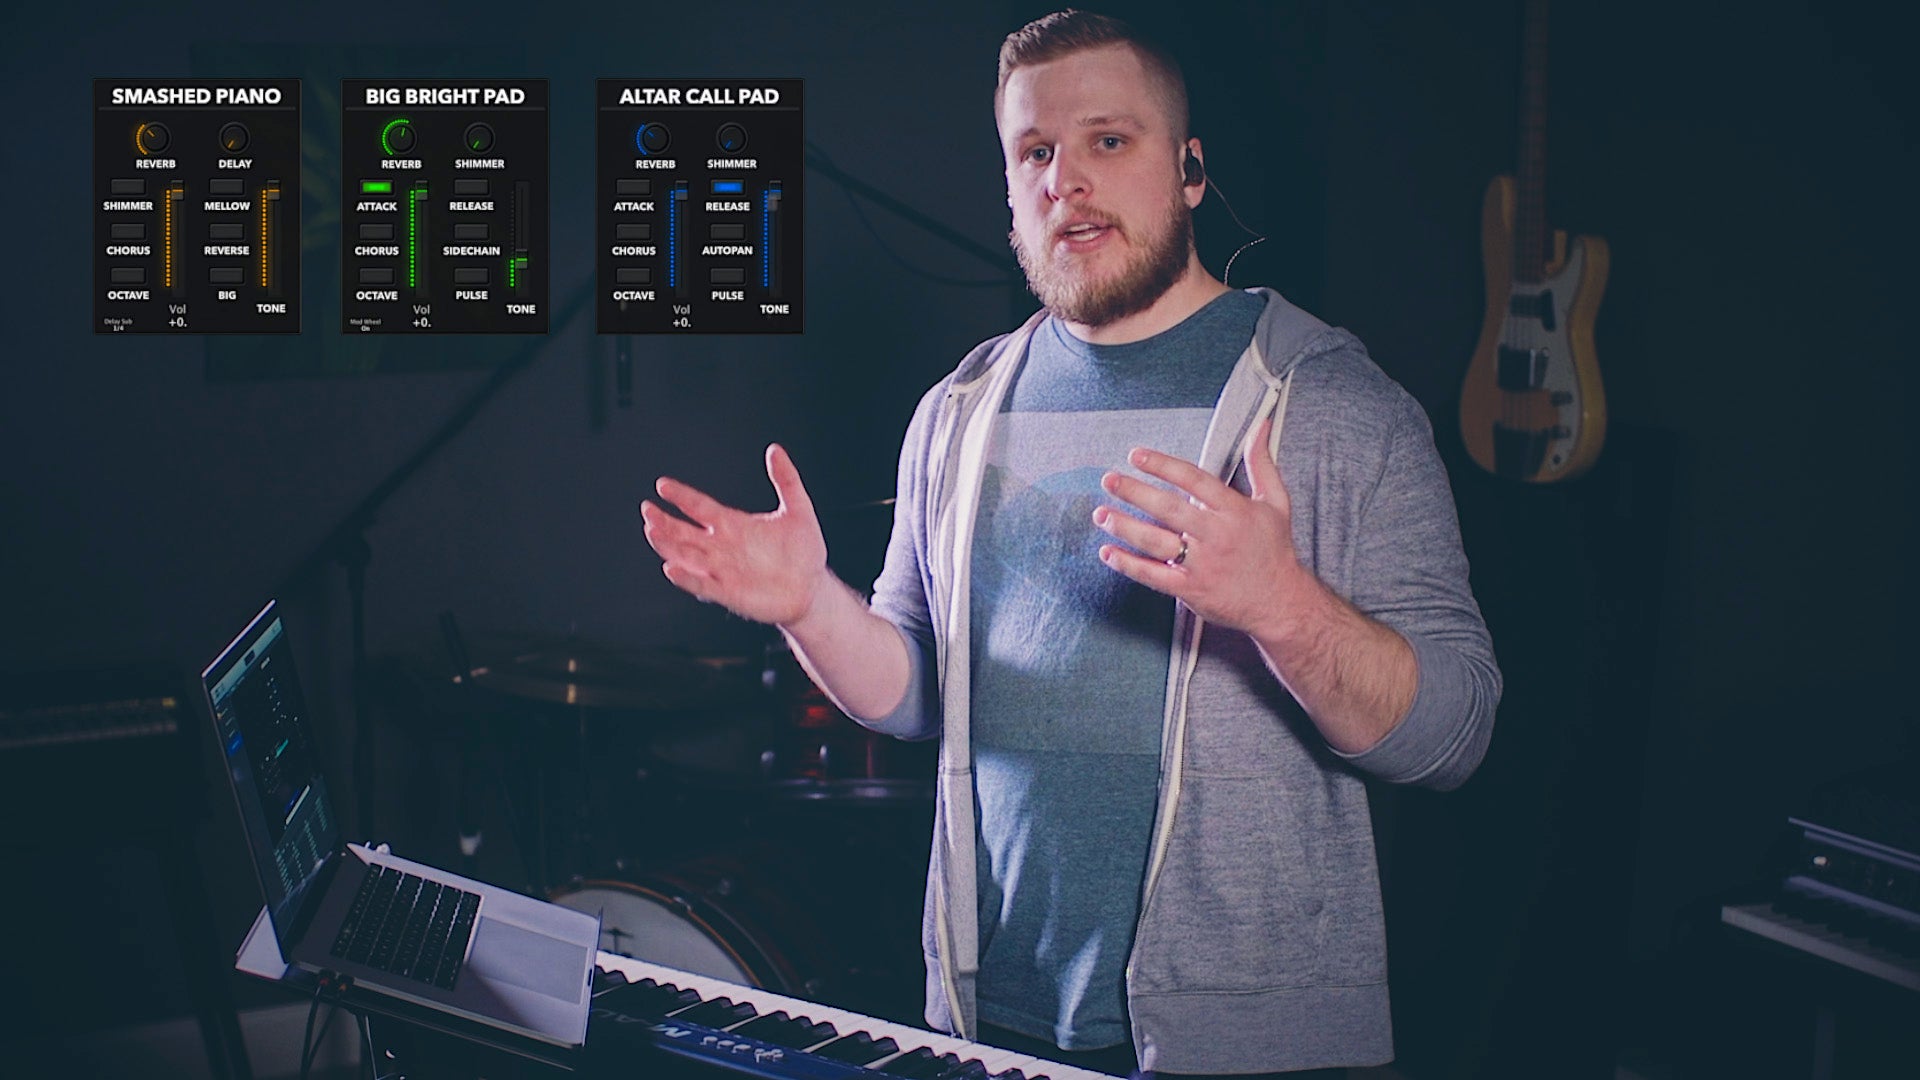 Sunday Keys Version 2: Create the Perfect Piano & Pad in Seconds!